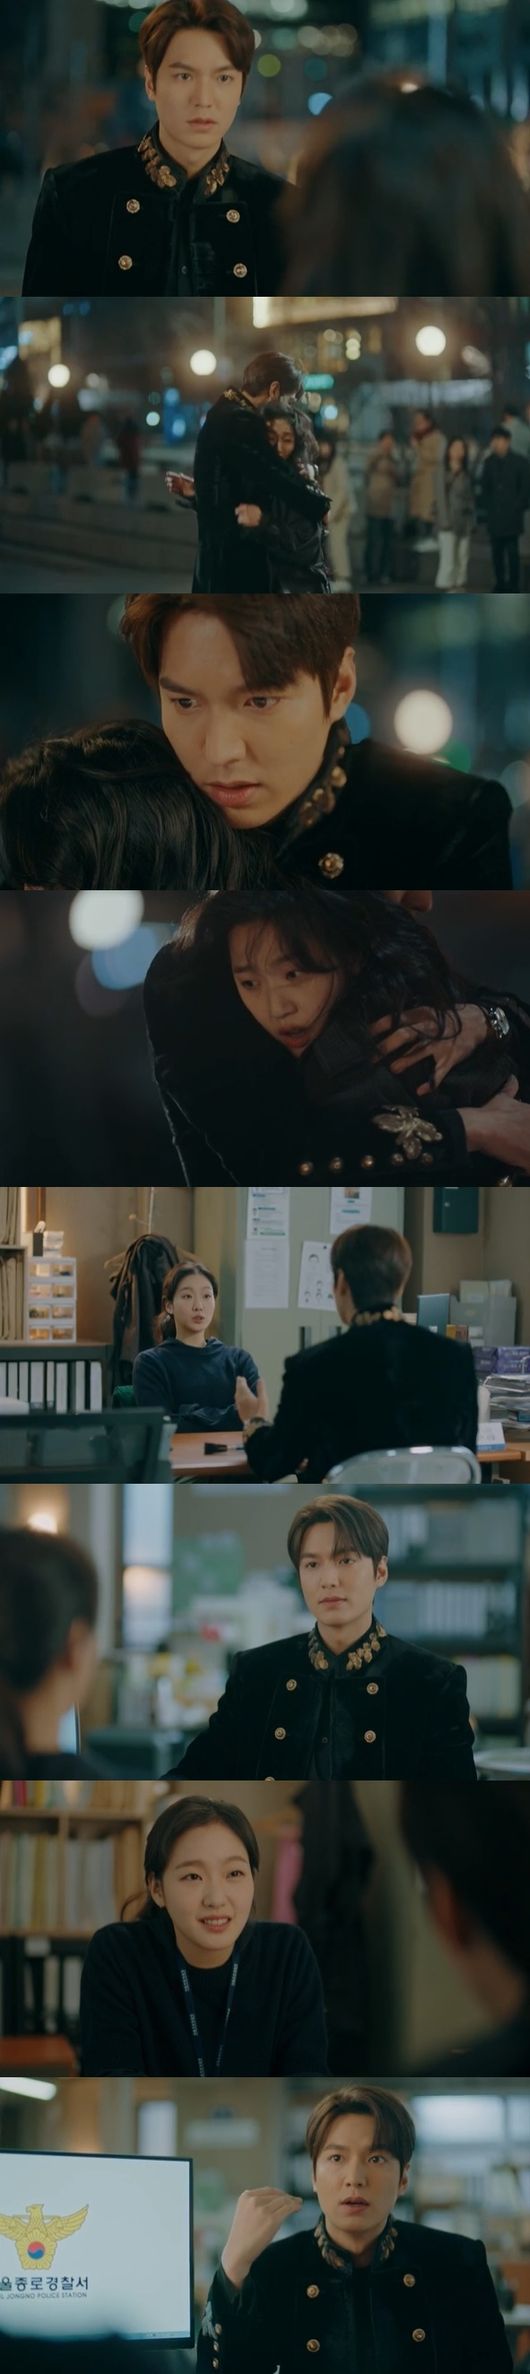 The King Lee Min-ho formally proposed to Kim Go-eun, staying in parallel World without returning to Korean Empire.In the second episode of SBSs new gilt drama The King - Eternal Monarch (playplayed by Kim Eun-sook, directed by Baek Sang-hoon and Jung Ji-hyun, and produced by Hwa-dam Pictures), Lee Min-ho was shown to stay in parallel World while formally proposing to Kim Go-eun.Lee, who came to South Korea, a parallel world from Korean Empire on the Maxi Iglesias, met Jeong Tae at Gwanghwamun.Lee had seen South Koreas situation 25 years ago, the same as the one that had saved him, and hugged him while pretending to know.But Jung Tae-eun said, What are you! Are you crazy? Cant you see your ID? What did you do to the police?If you just explain the current situation briefly, I am the emperor of Korean Empire, and I came here beyond the dimension.I was embarrassed for a while, but I think it is probably World in parallel. This World is not the emperor, but the queen.Get me to your monarch, he ordered.Jung Tae-eun said, How do I guide you?Ticketing, he said. So you are on the way from parallel World, and there is the Korean Empire emperor, and lightning struck on the way, is that a seven-piece?I was absurd.Lee thought that Jung Tae-eul did not understand parallel world, and Jung Tae-eul was taken to the police station with anger that what is it?Igon was unable to identify in South Korea, and was not even registered with fingerprints; after suffering twists and turns, including being held in a holding cell by the emperors body, he was barely released.From the police station, Igon sold the DIA attached to the top and made money. As he stayed at the hotel, Maxi Iglesias left it in the yard of his house.Asked to take care of him before he returned to Korean Empire.Ill take care of you until you get your DNA results. You better stay calm. If you dont want to know the market price, Jung said.While studying various books in bookstores, South Korea is a country that selects presidents, not emperors, and has learned various history quickly.At the same time, Kim Tae-eul explained the parallel World several times, but it did not work.I found Jung Tae-euns house to see Maxi Iglesias. At this time, Jung Tae-eun left him and went out.Just go back to your family with the DIA money, you will have a family, and the family will be worried about you, said Jung Tae-eul.Is that what you were wondering? Im still single.I do not have a direct family, he said. I would give you a place where you can not know who I am. I will welcome you to my Empress, Lieutenant Jeong Tae-tae, and you have just become the reason why I am tied up in this World, Igon said formally.In the absurd remarks of Lee, Jung Tae-eun said, What is it? I thought it was only half crazy, and now it is all crazy.In the third trailer, Igon said, I missed you for 25 years, he said, not returning to Korean Empire.The King - Lord of Eternity captures the broadcast screen